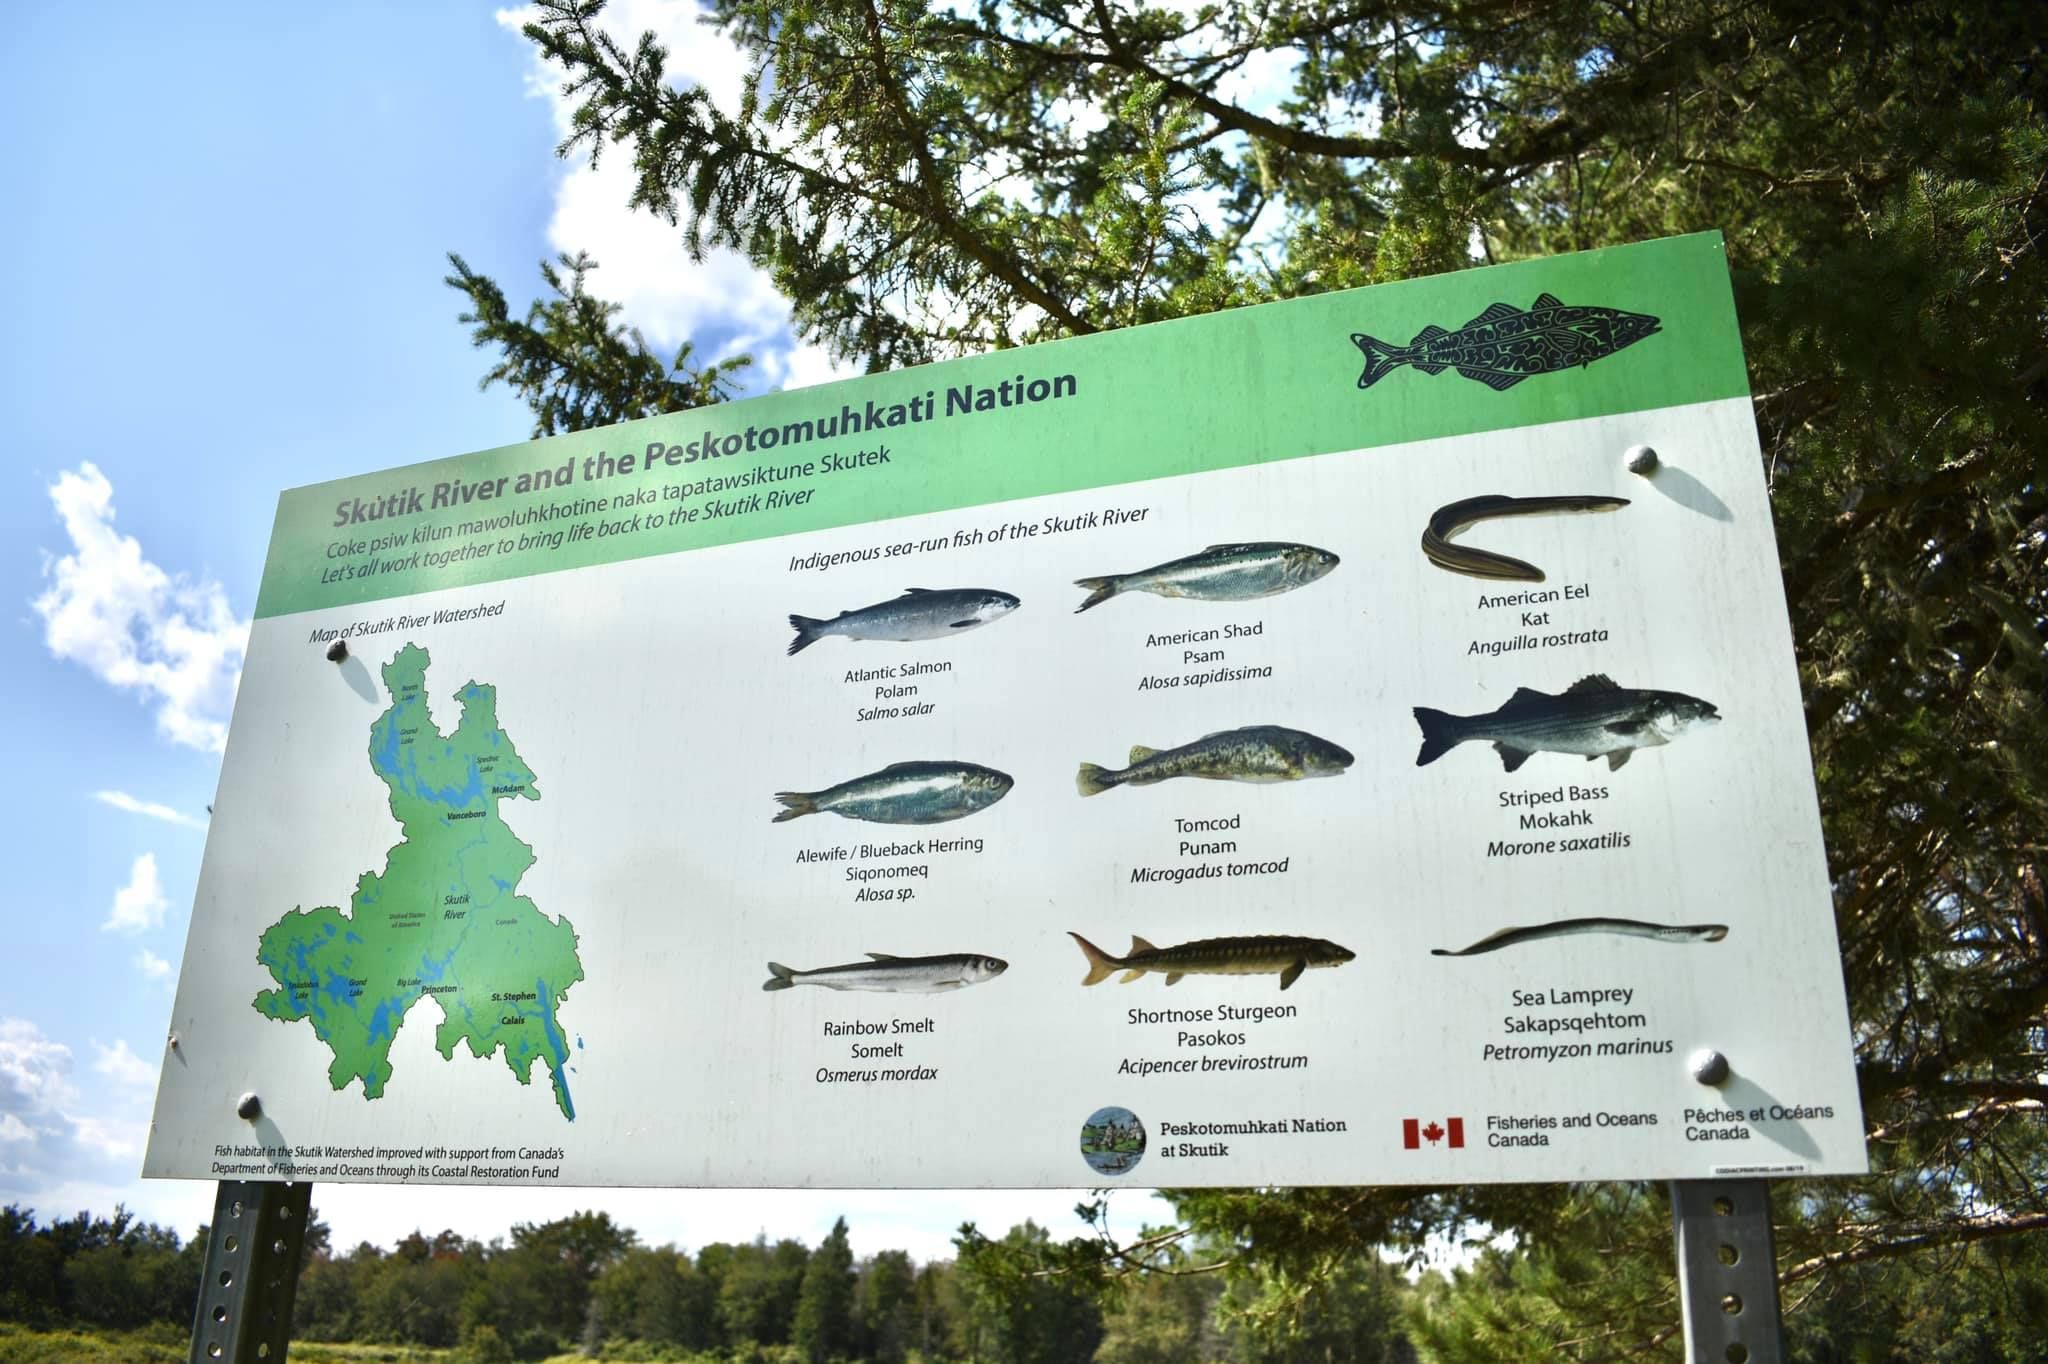 An outdoor sign displaying a map of the Skutik River and the Peskotomuhkati Nation and illustrations of the various fish species found there.